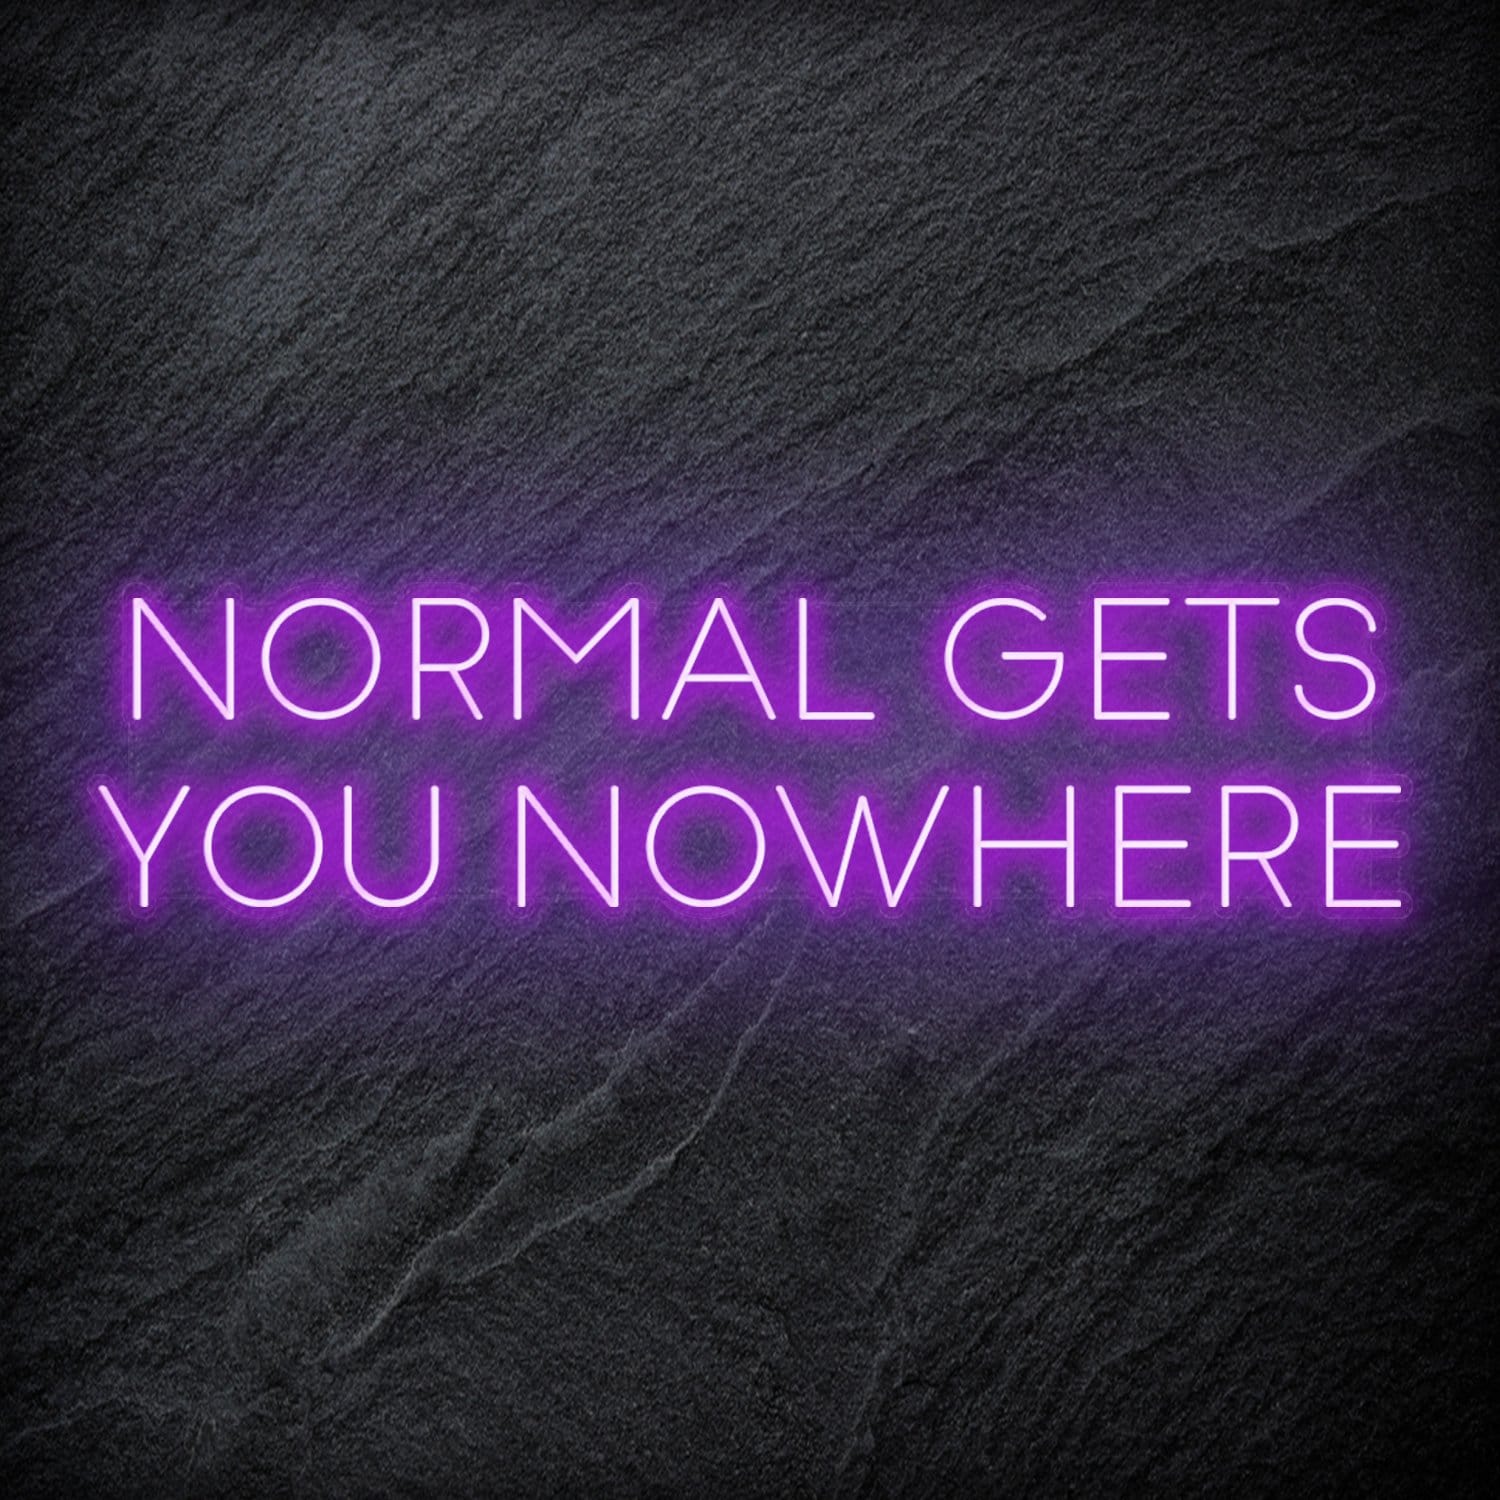 "Normal Gets You Nowhere" LED Neon Sign Schriftzug - NEONEVERGLOW